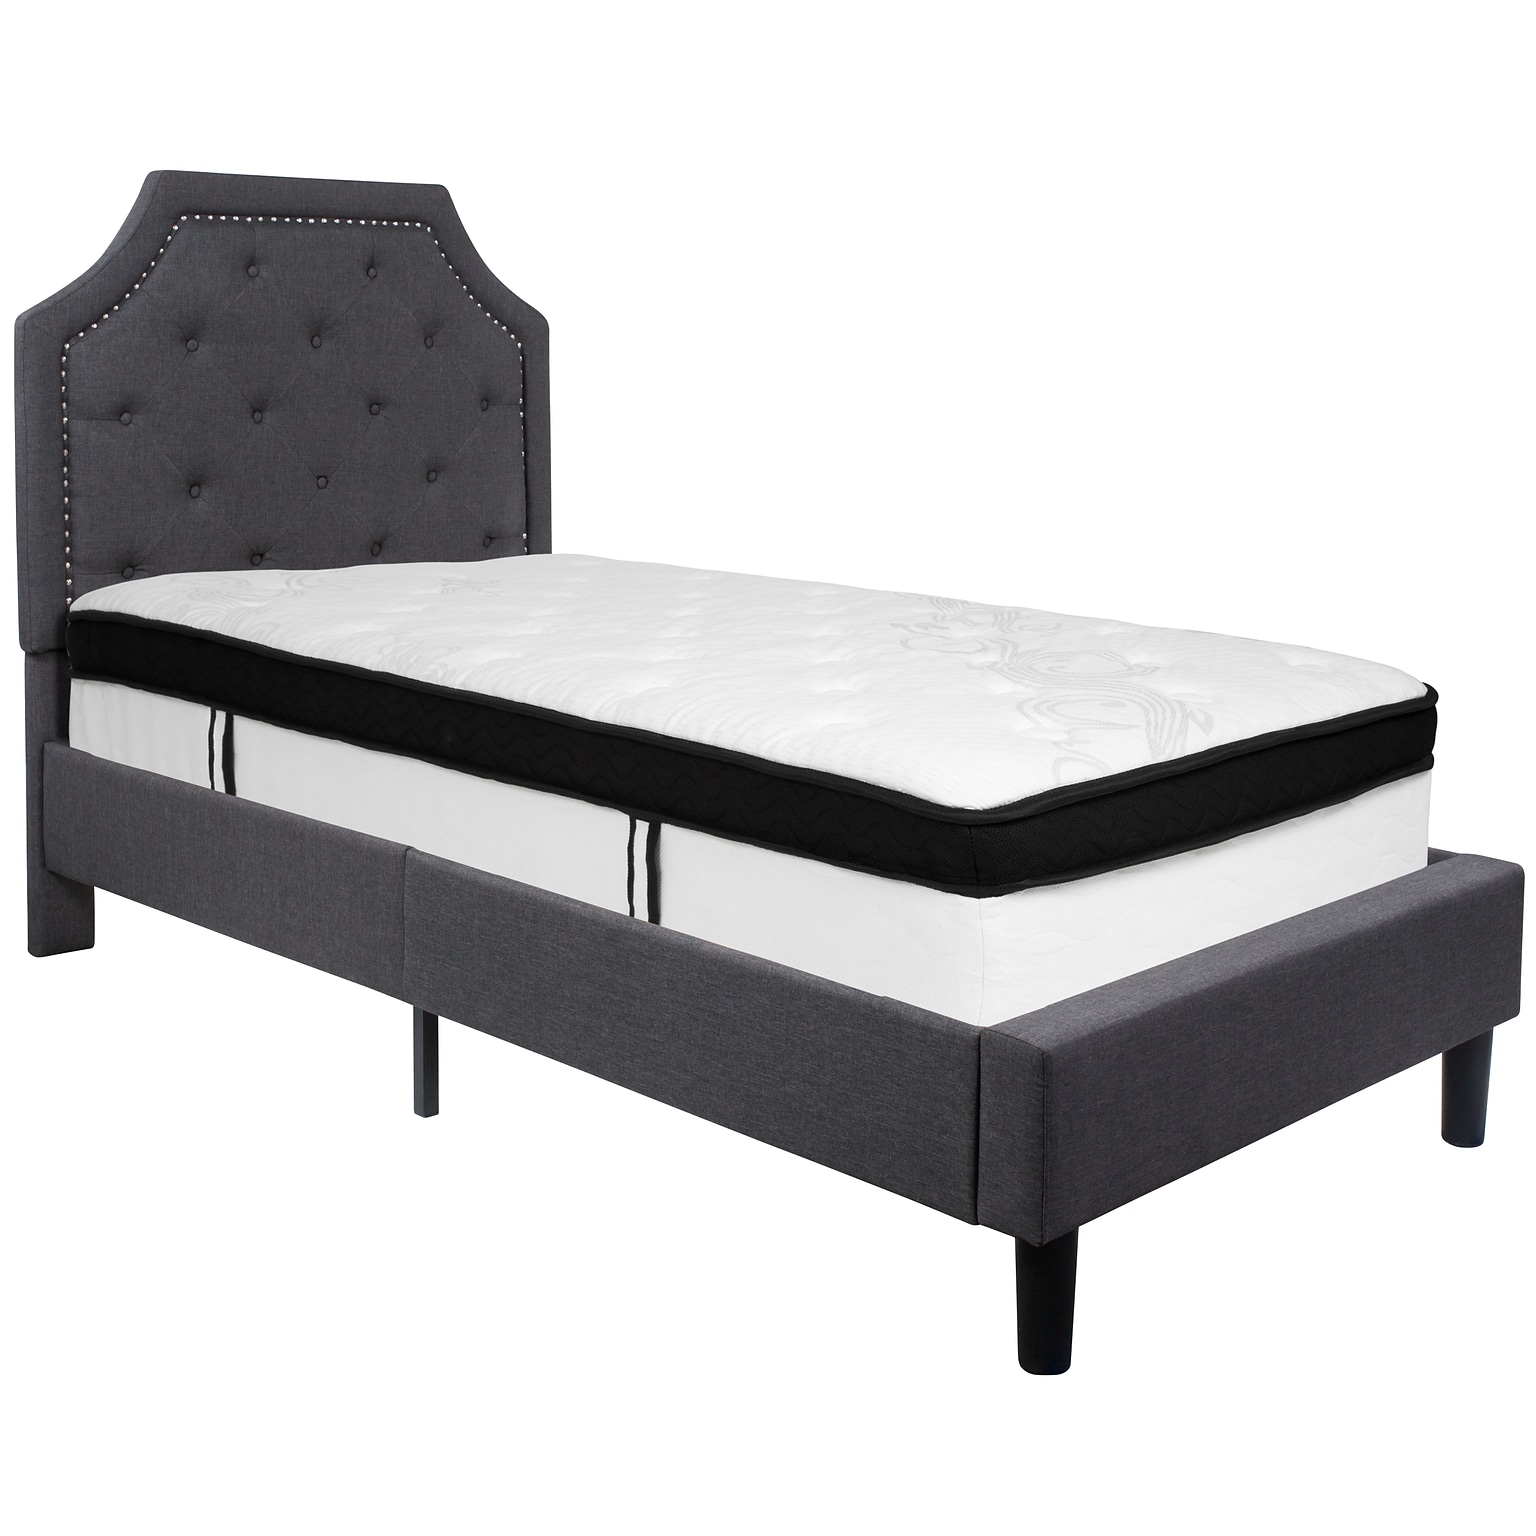 Flash Furniture Brighton Tufted Upholstered Platform Bed in Dark Gray Fabric with Memory Foam Mattress. Twin (SLBMF13)